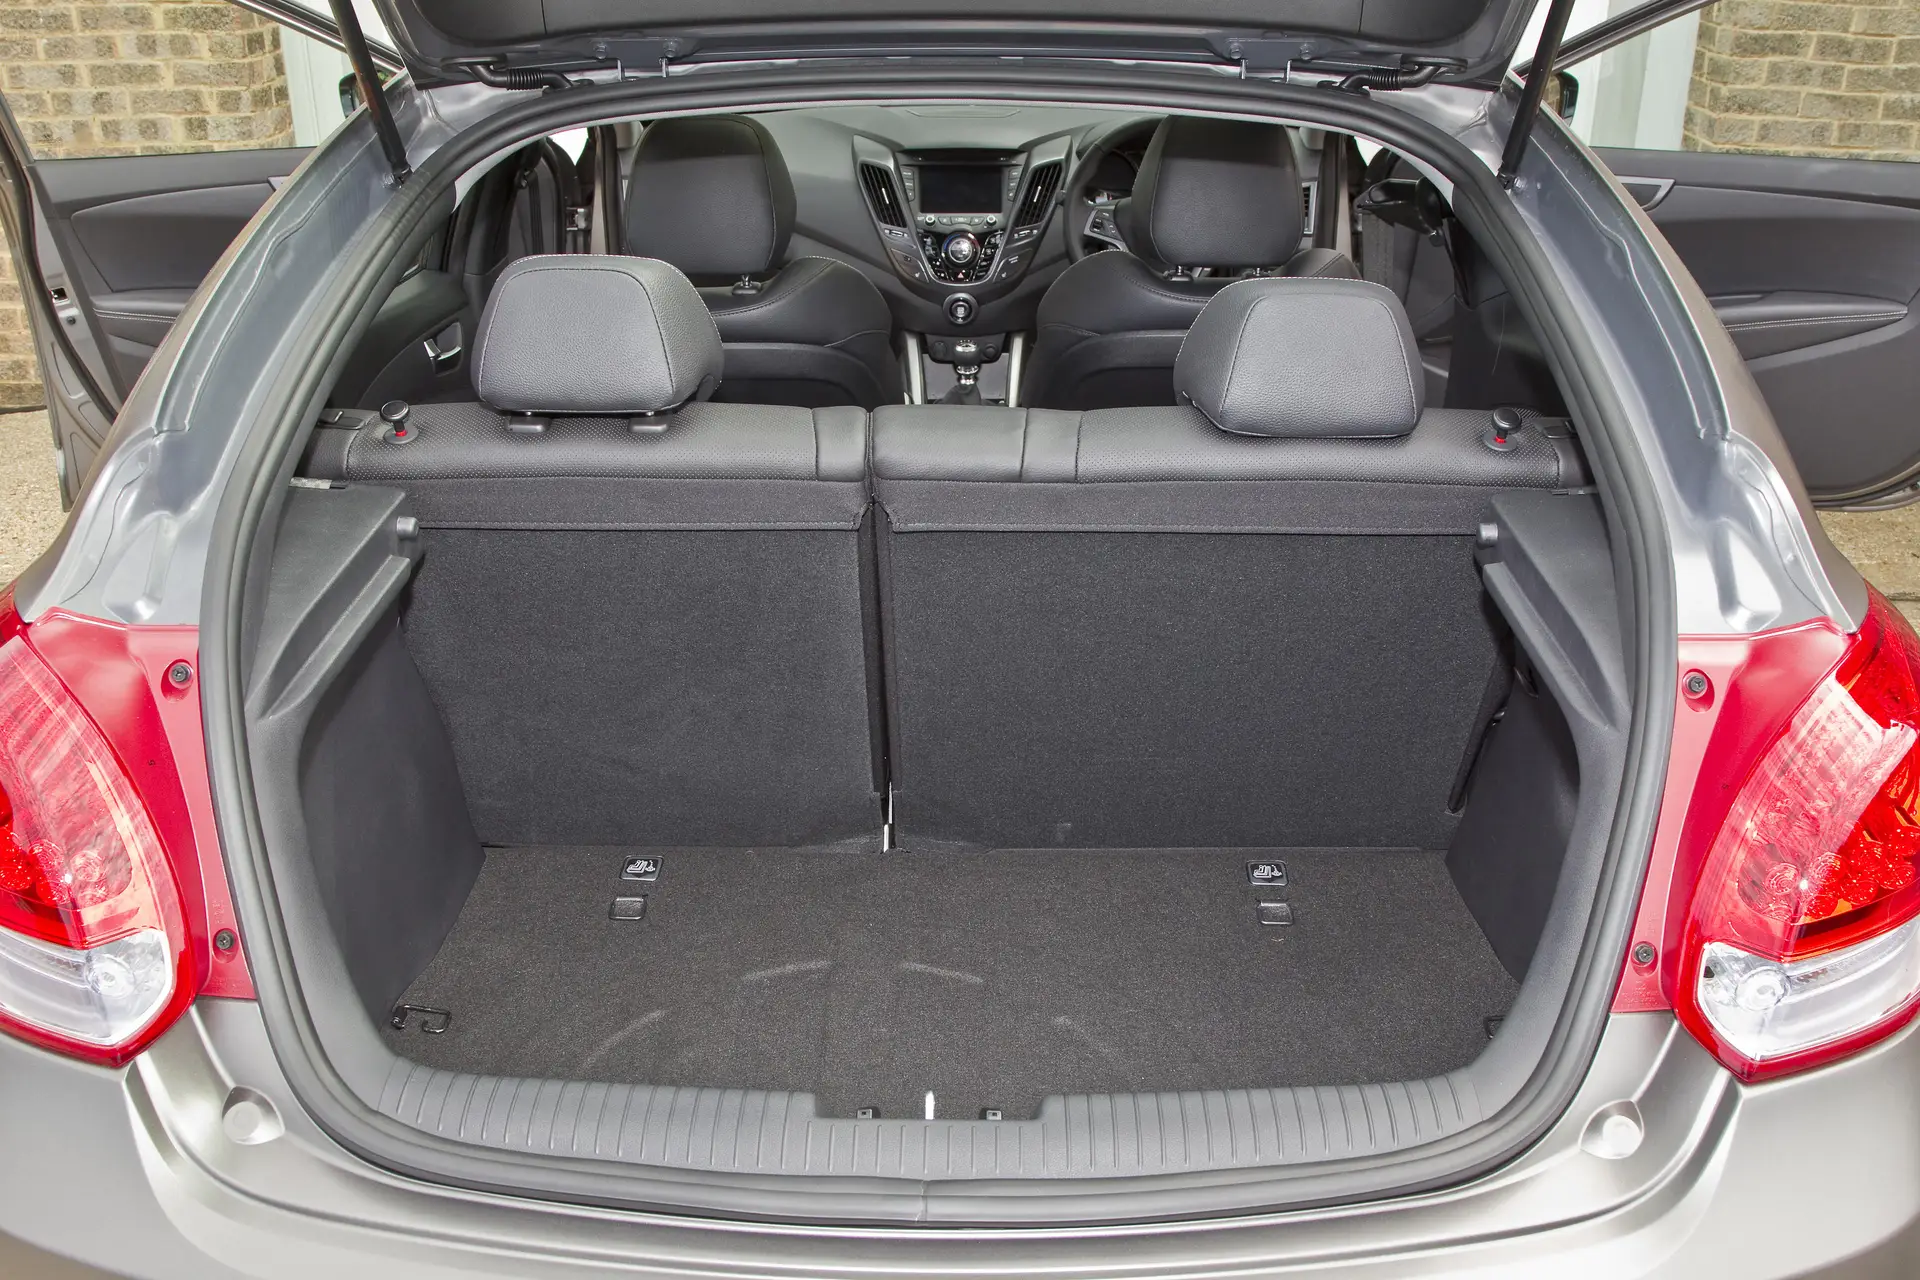 Hyundai Veloster (2013-2015) Review: interior close up photo of the Hyundai Veloster boot space